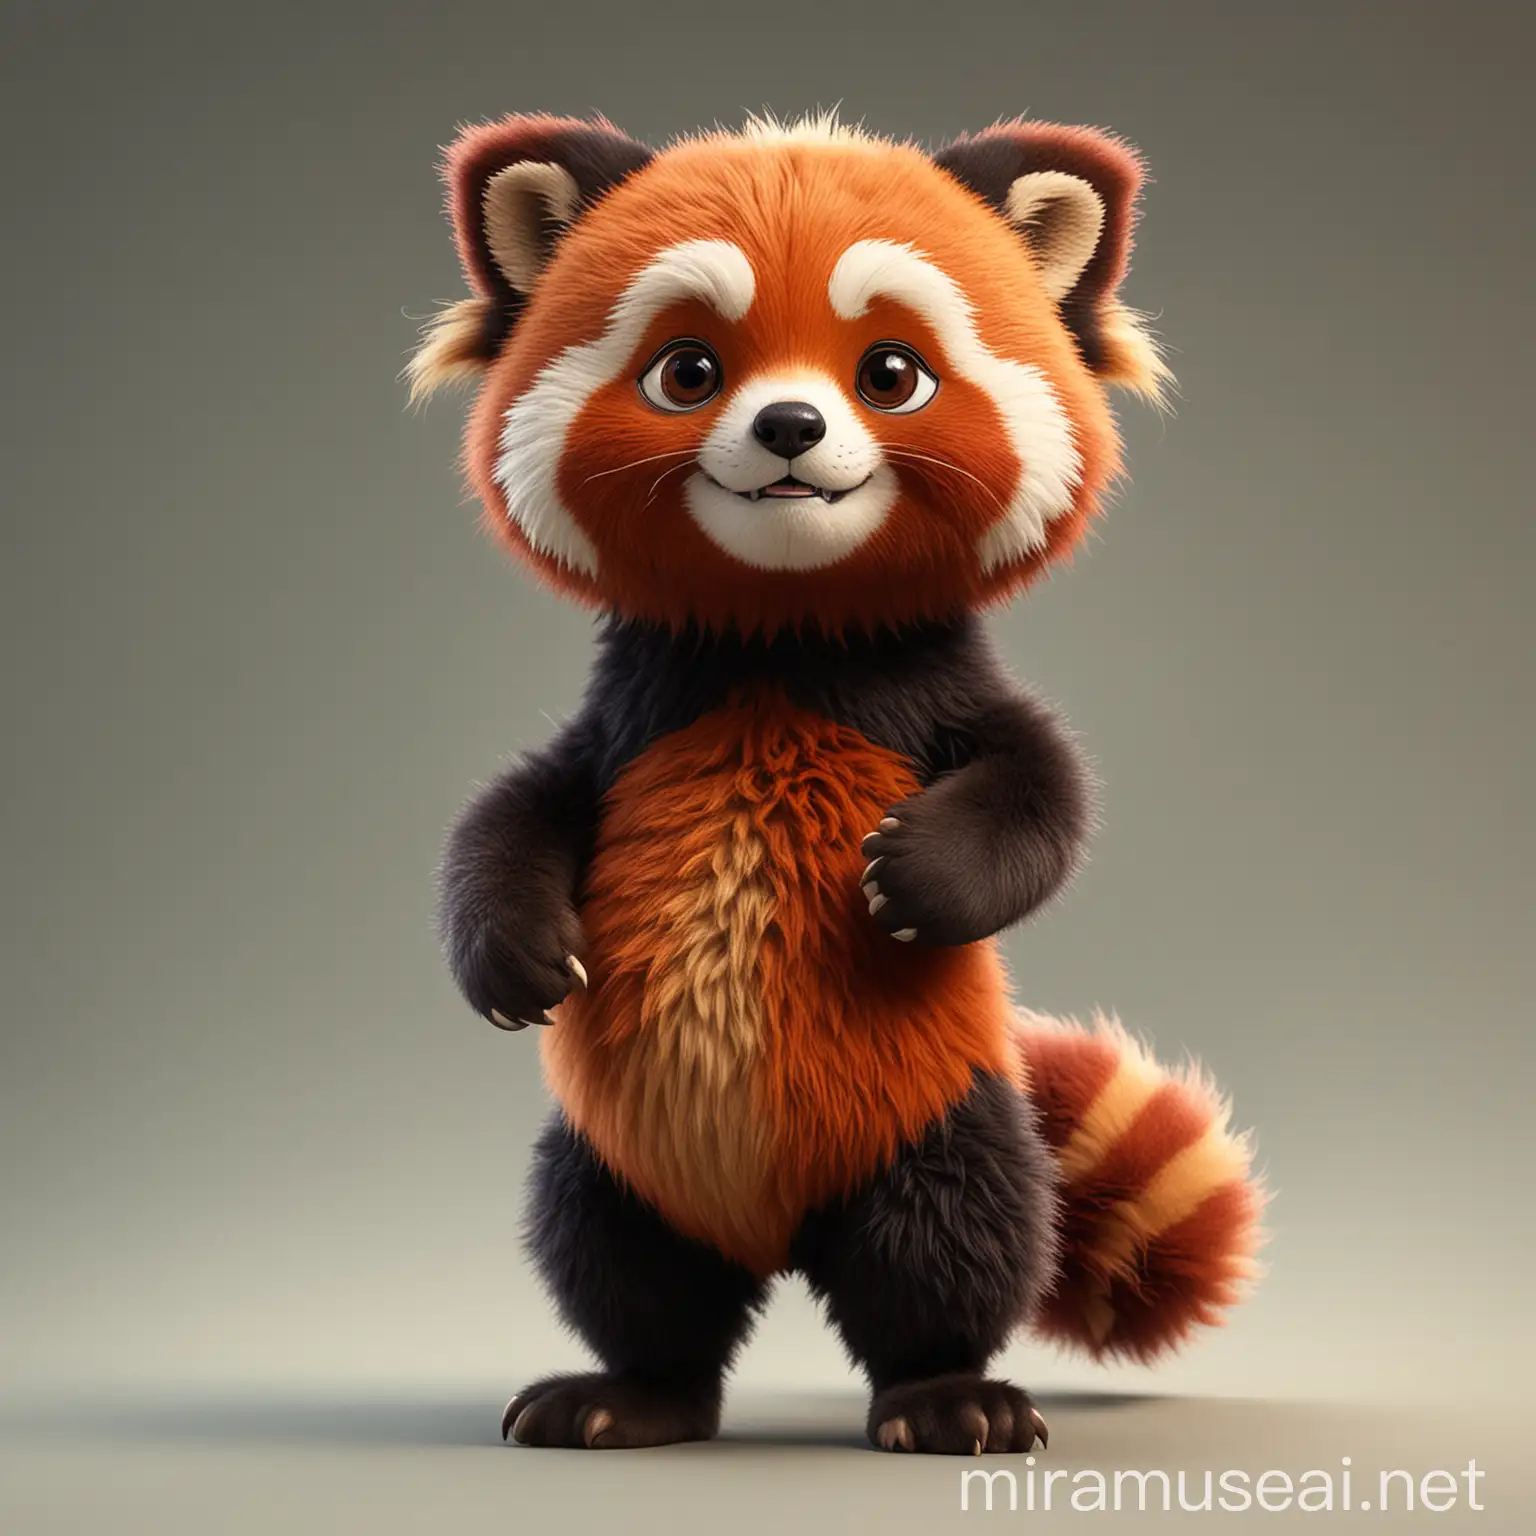 Cute 3D red panda in pixar style with textured and fluffy fur, standing on two hind legs